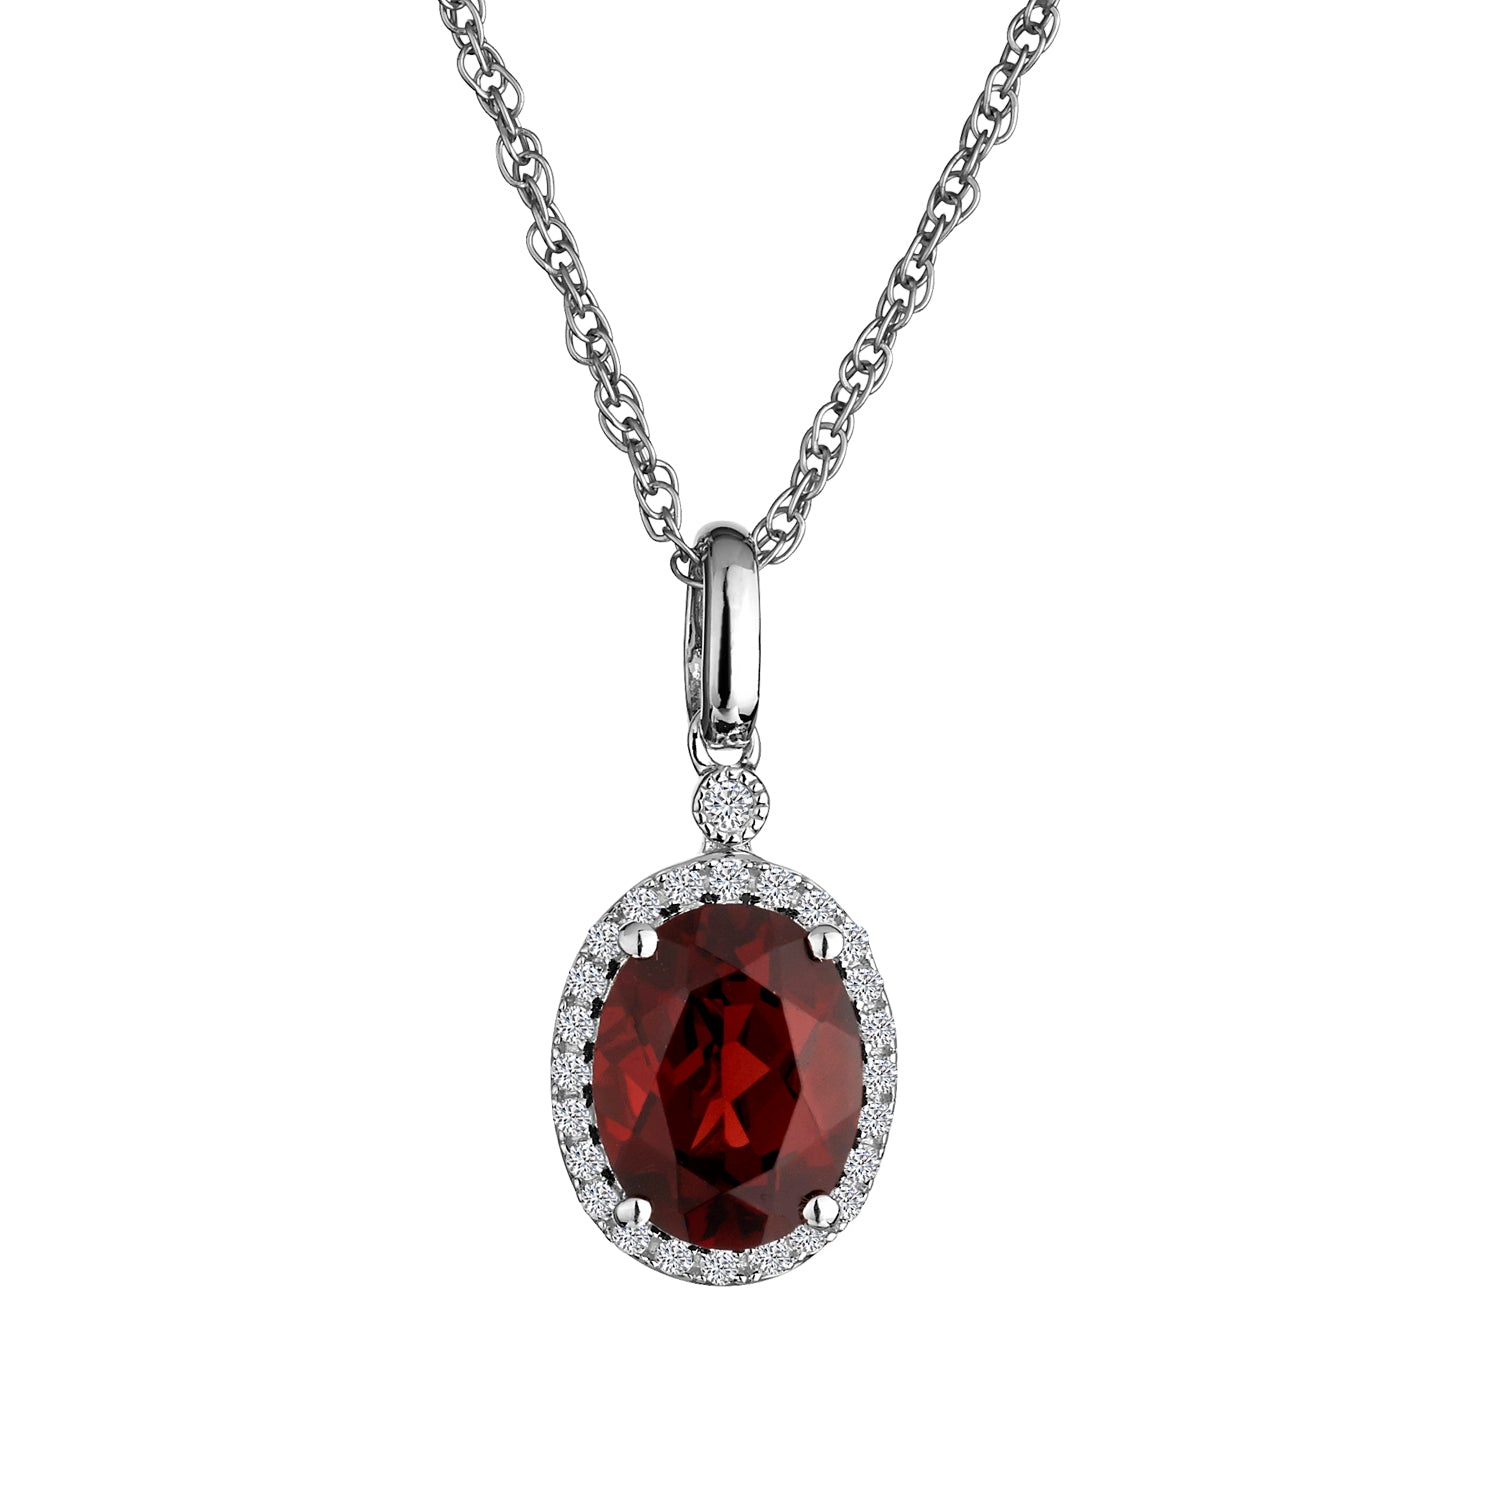 Garnet & Created White Sapphire Pendant,  Sterling Silver. Necklaces and Pendants. Griffin Jewellery Designs. 